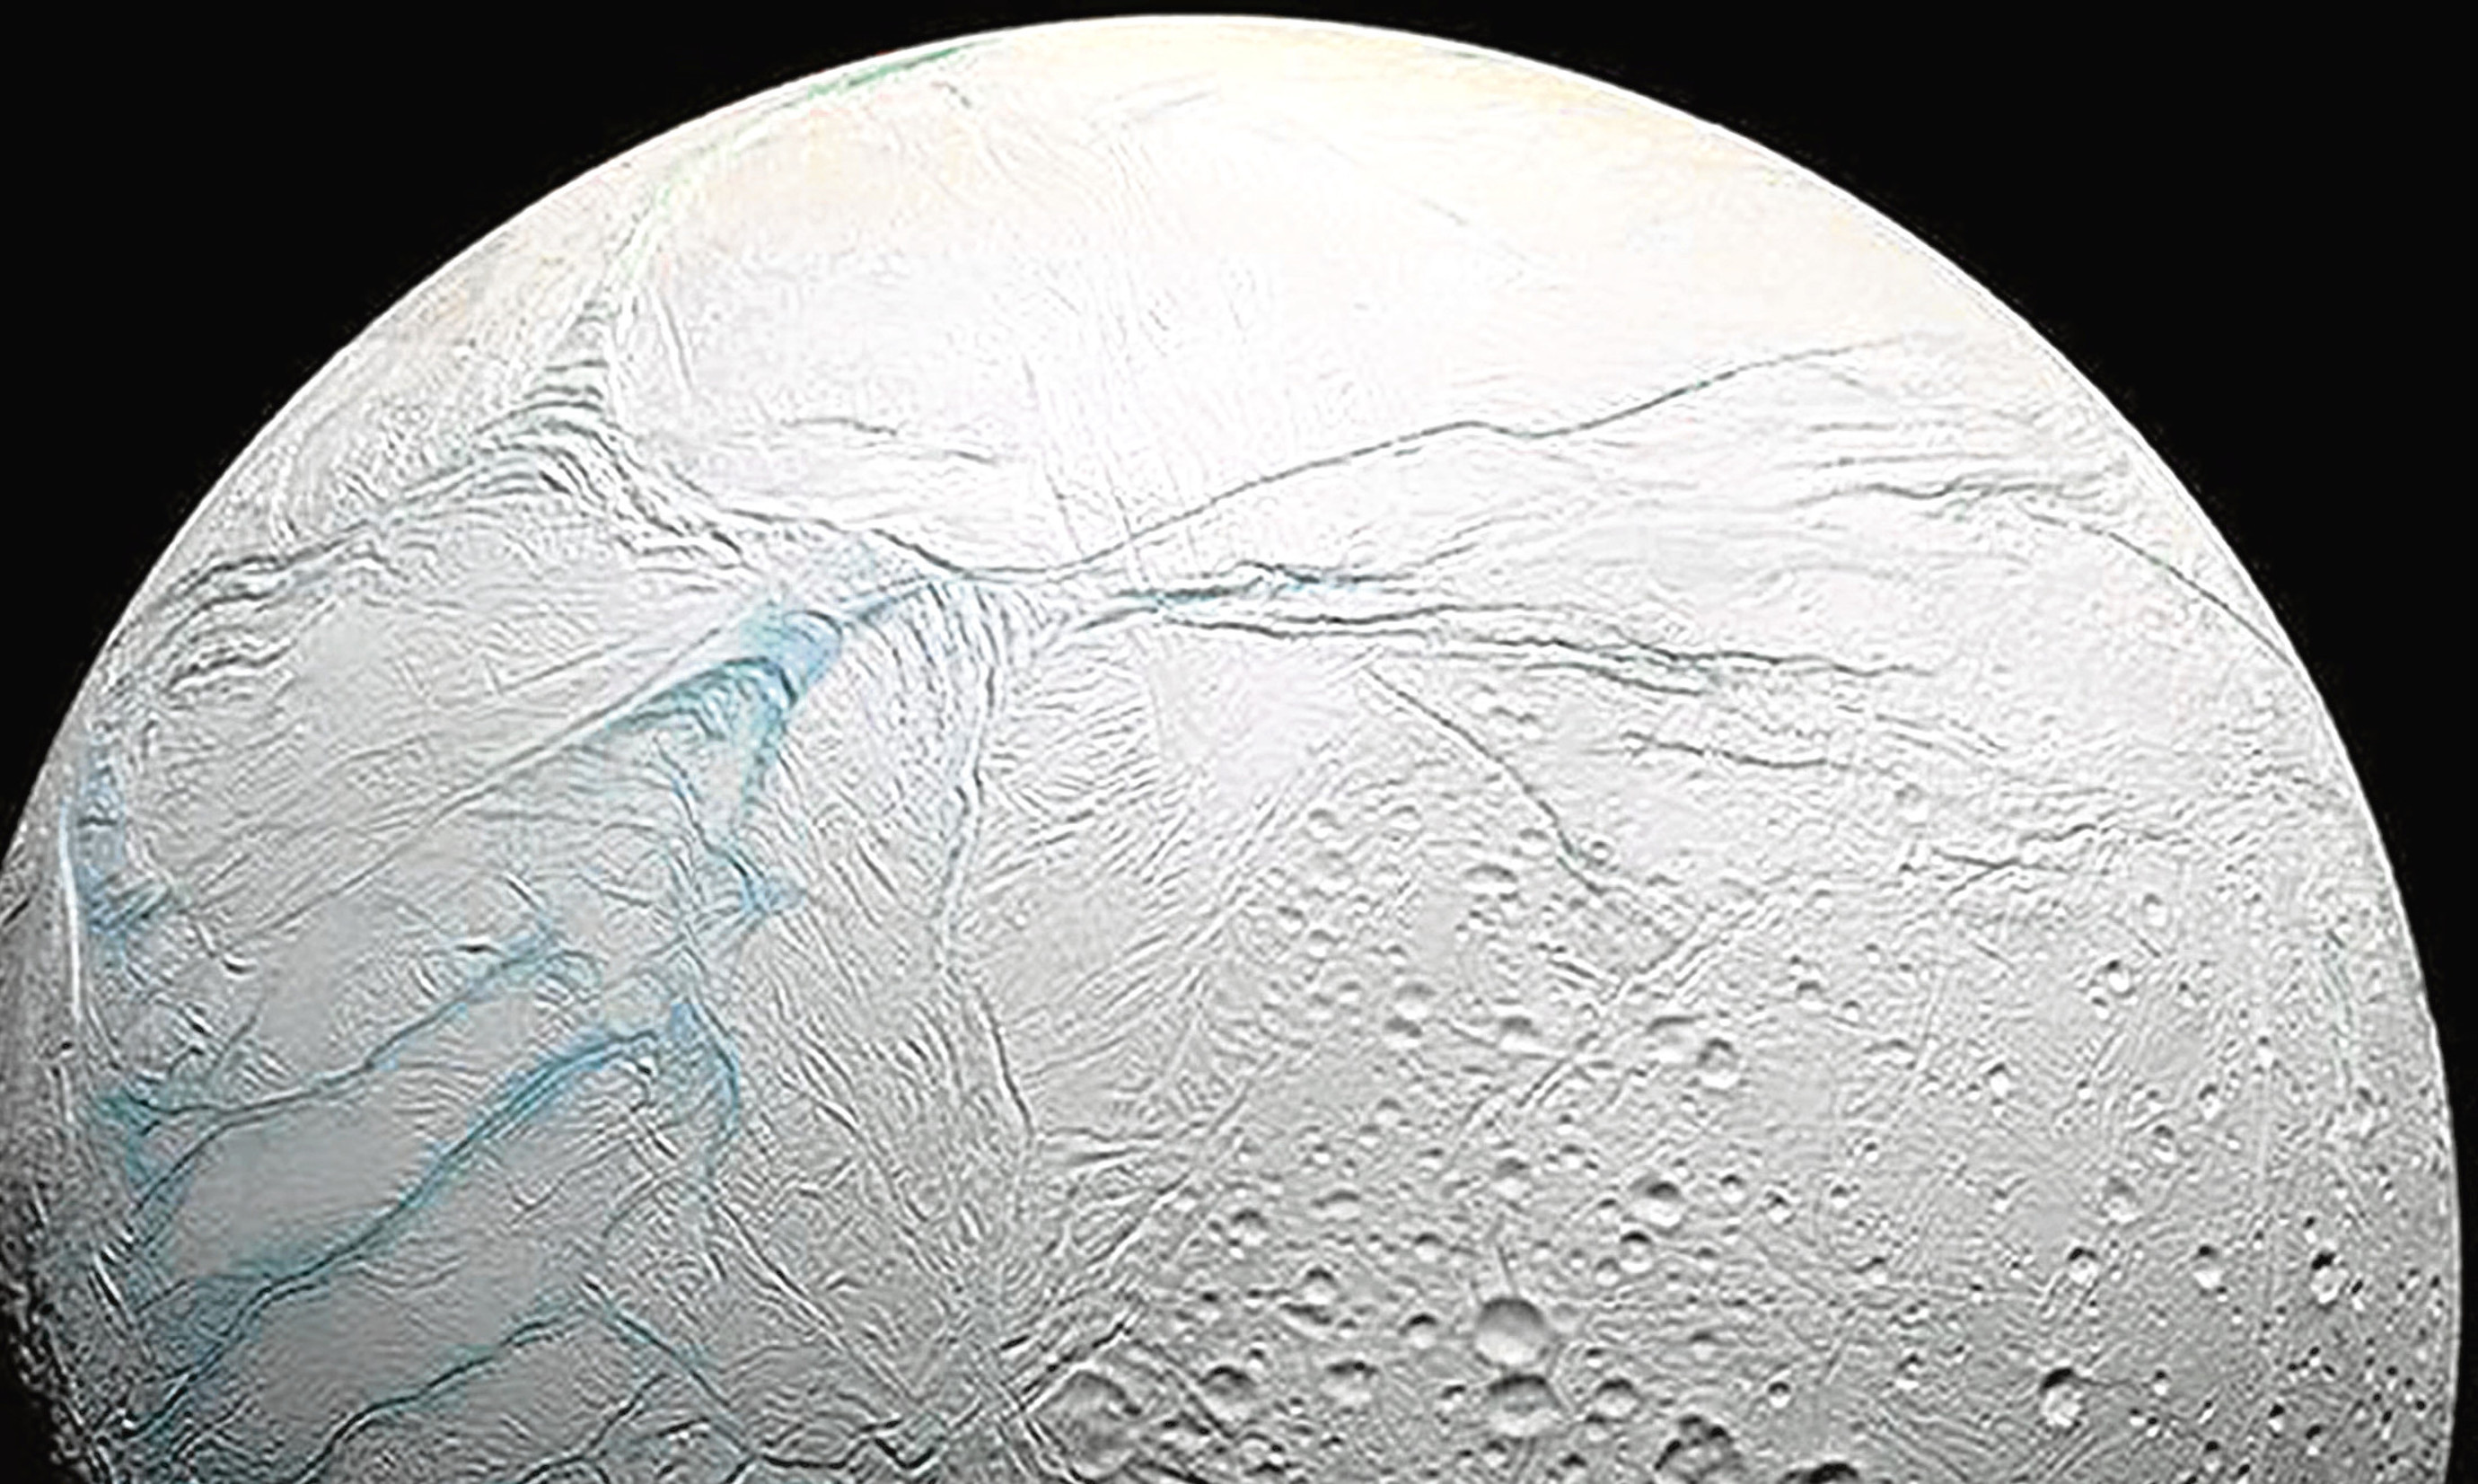 Saturn's moon Enceladus may hold life - just not very interesting life.